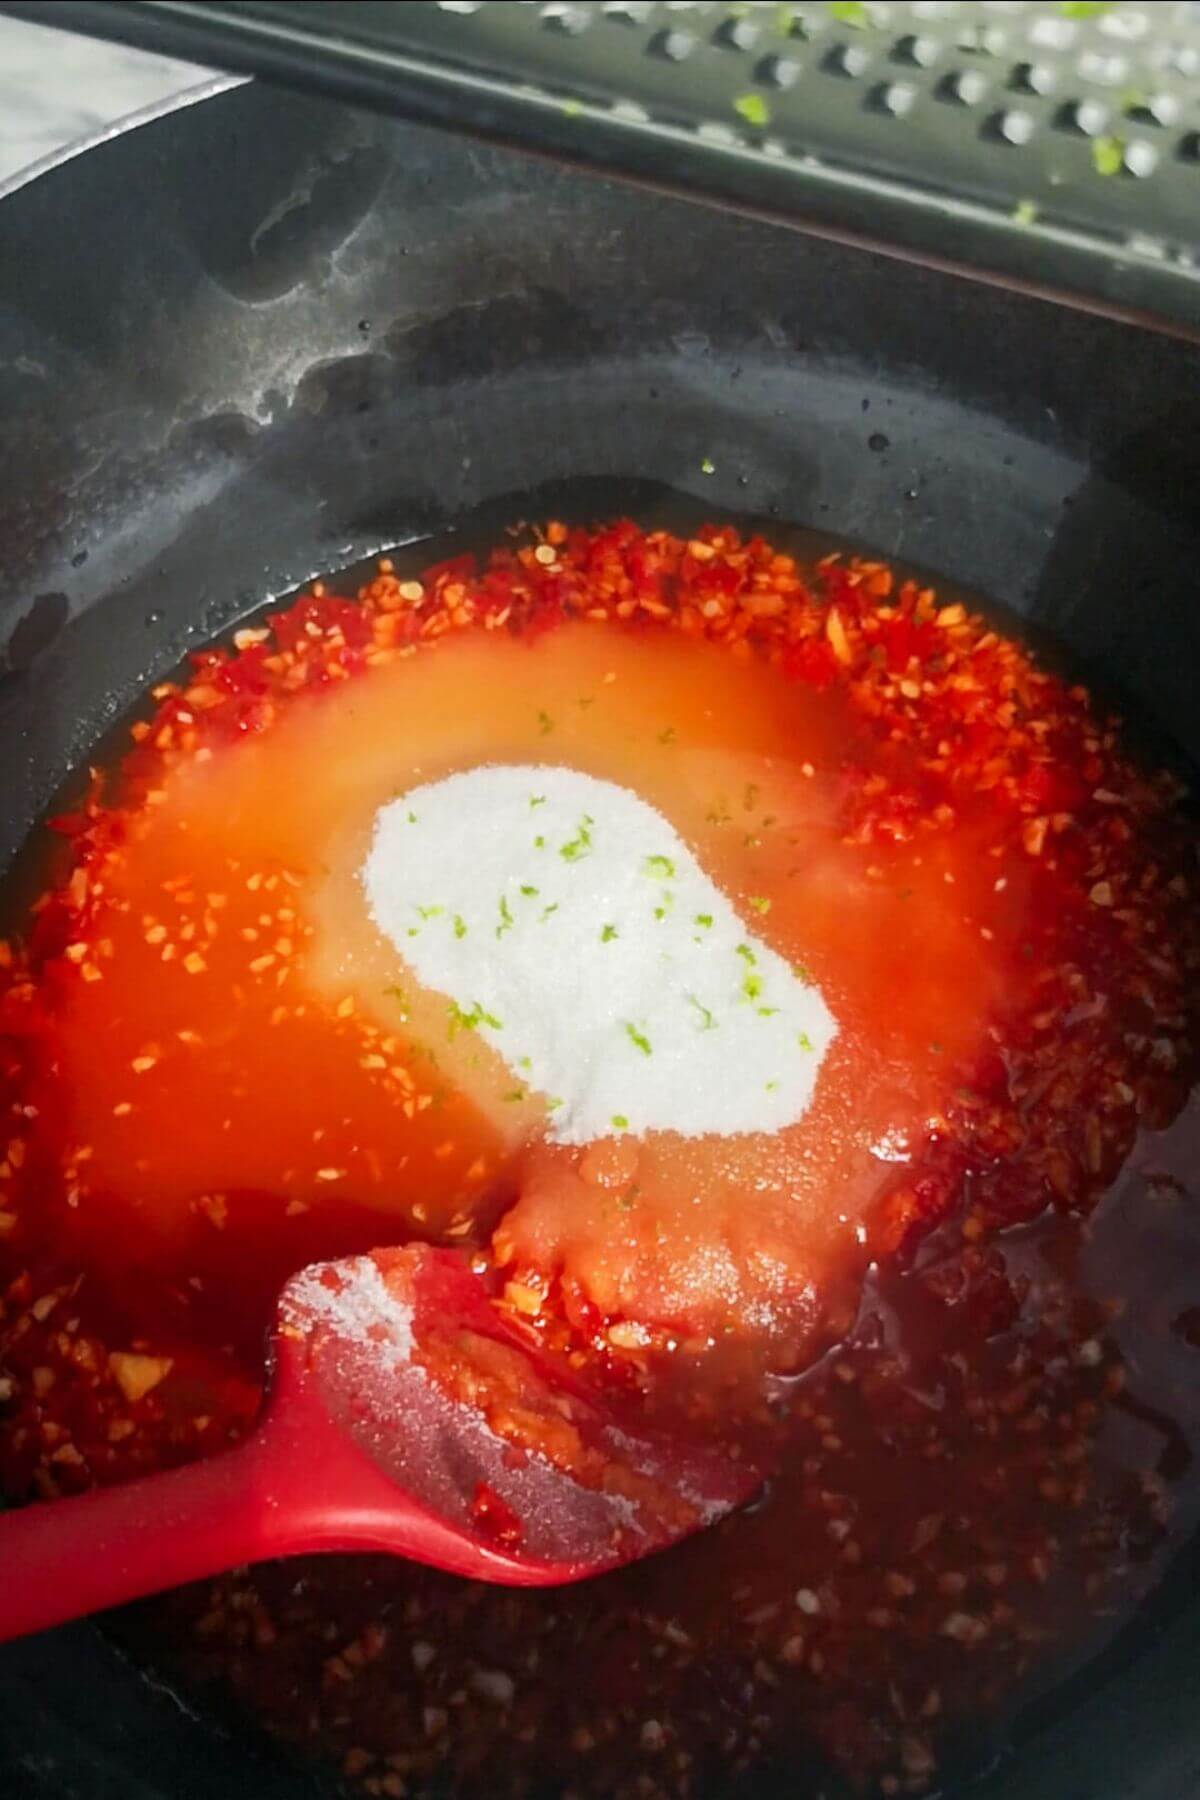 All other chilli jam ingredients being added to the chilli, ginger, garlic paste in a large black pot.